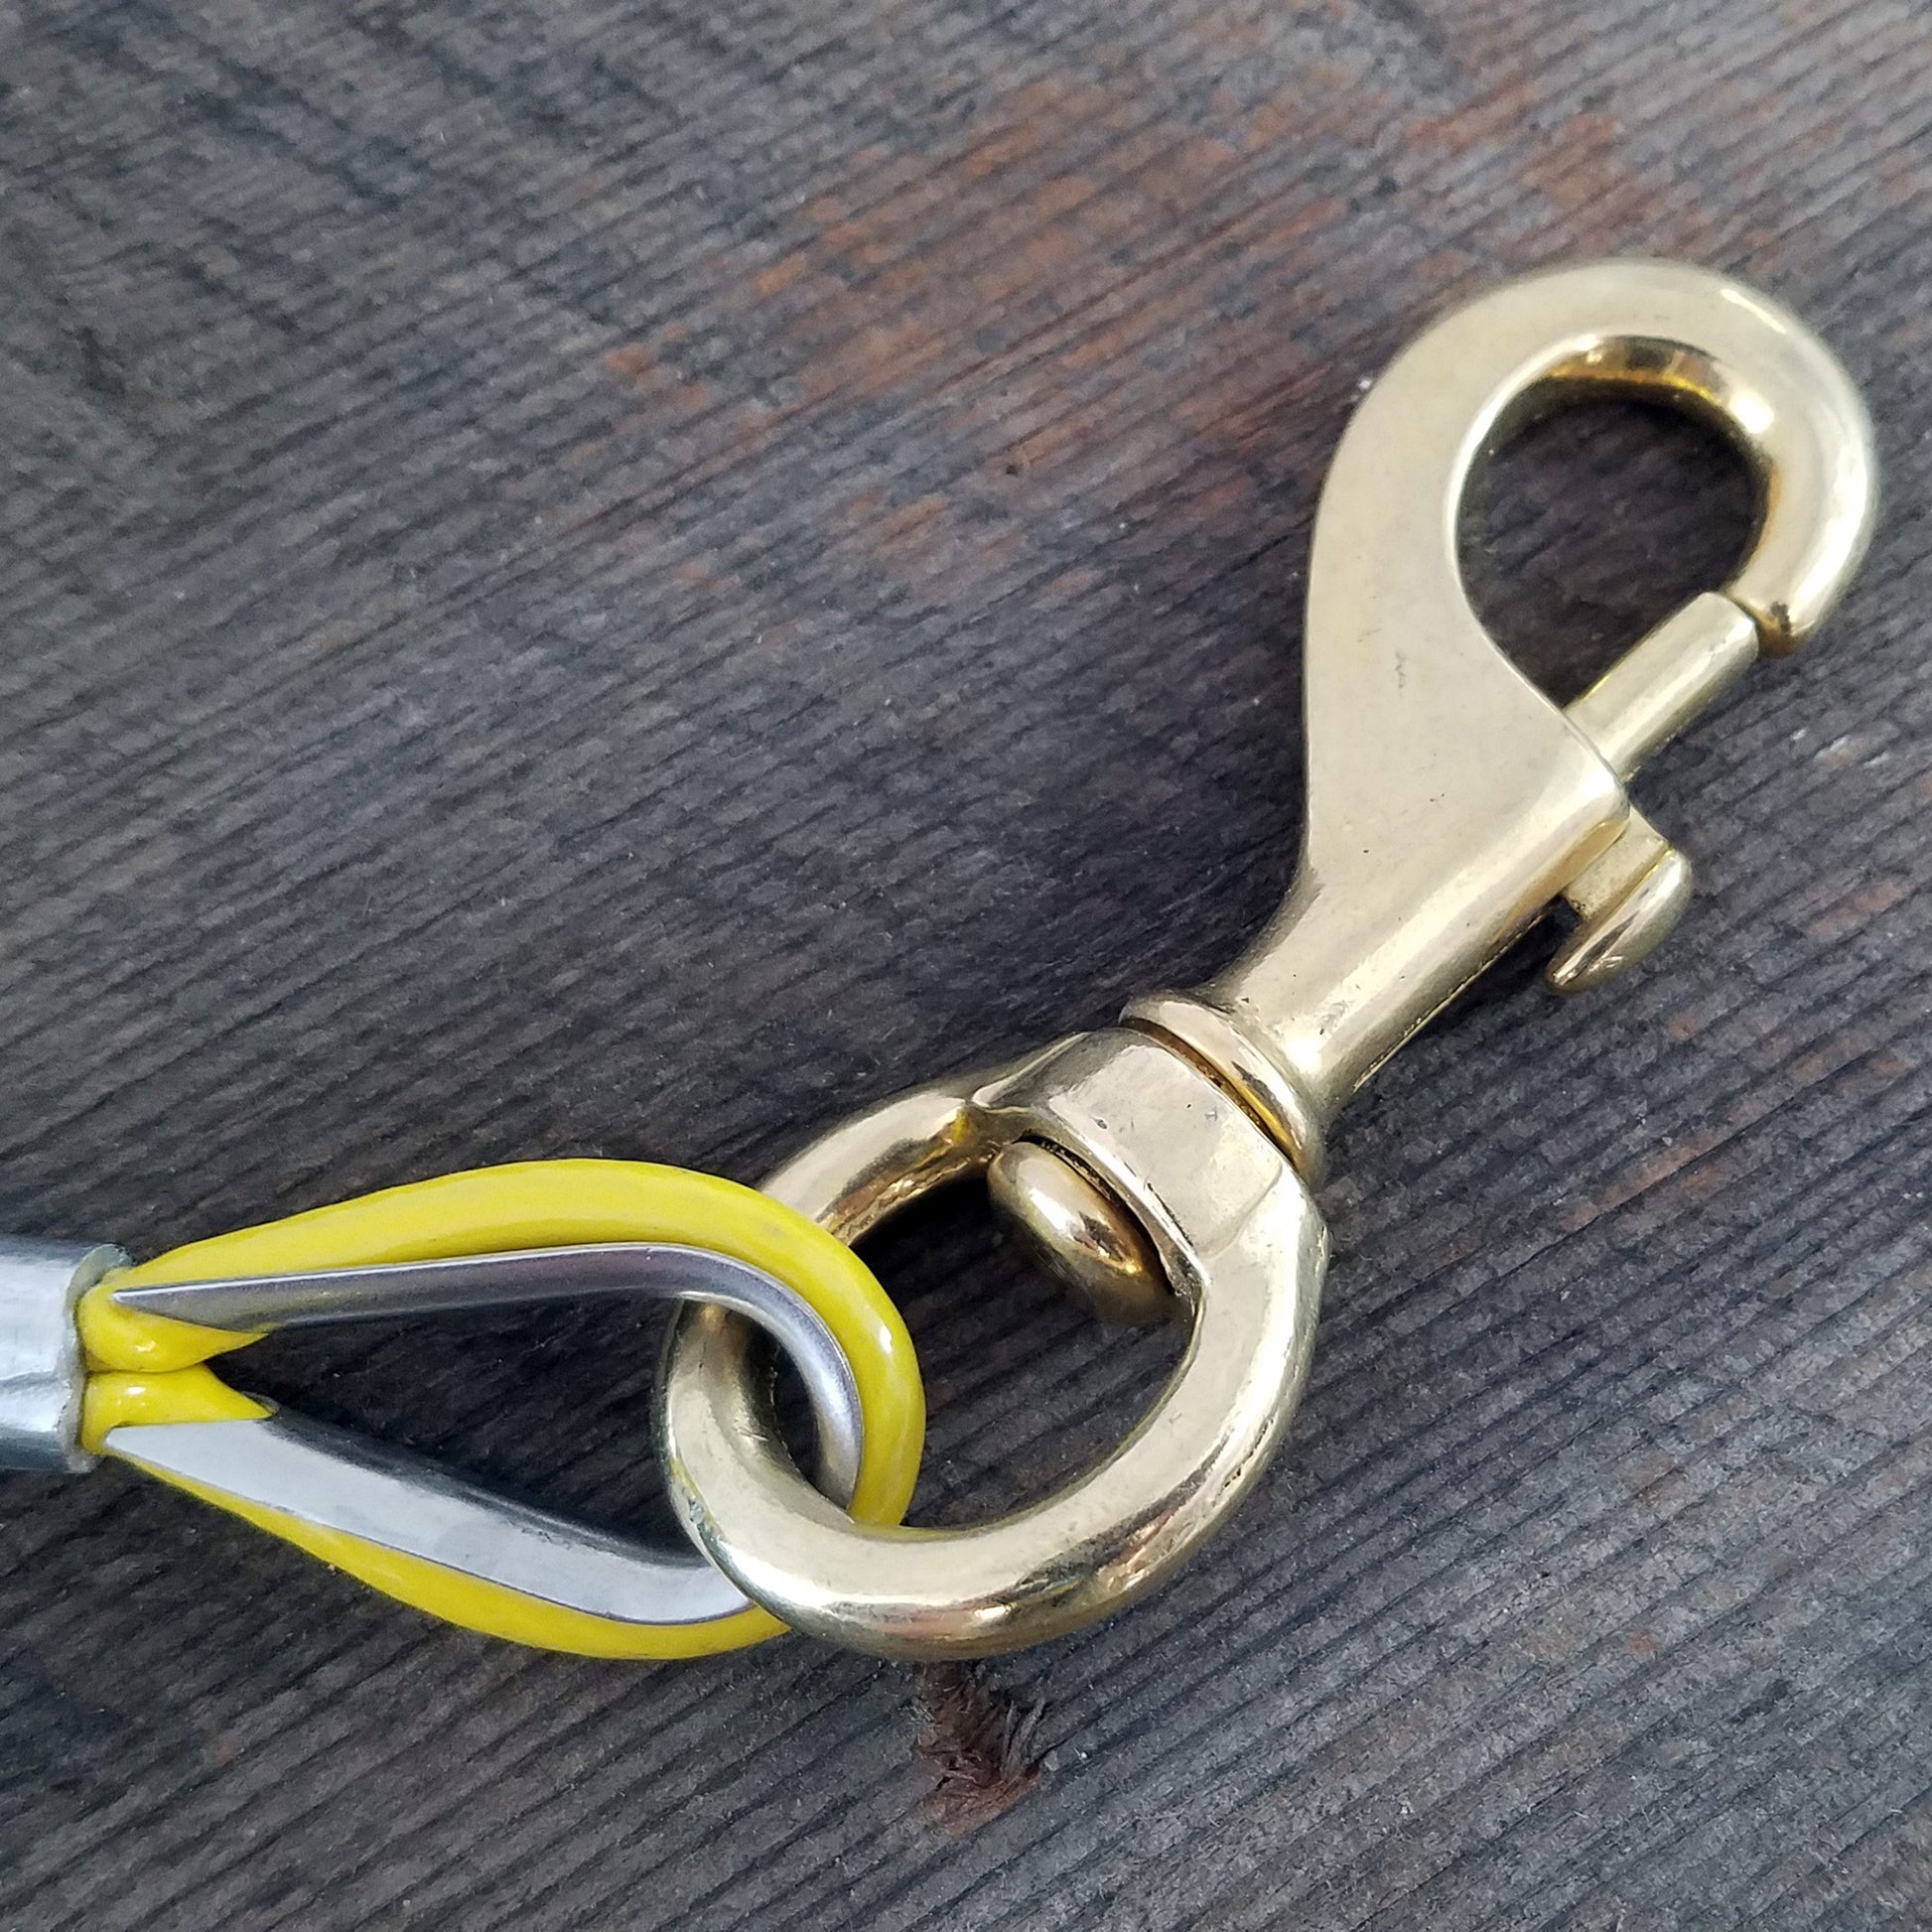 Dog tie out cable with solid brass swivel snaps